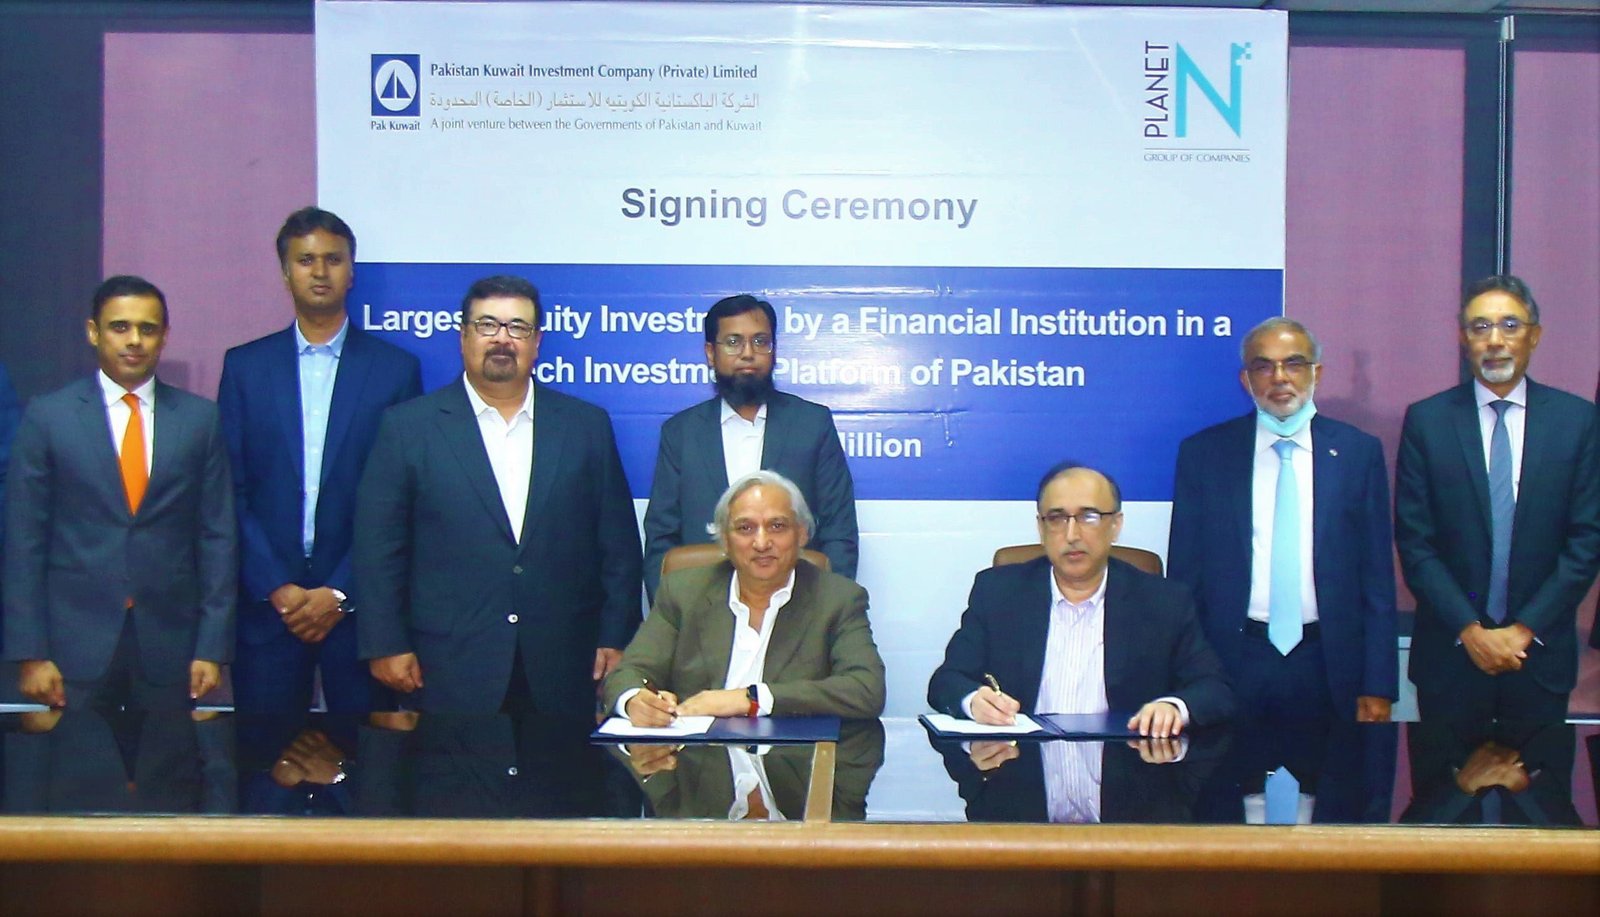 Pakistan Kuwait Investment Company To Make PKR 500 Million Equity Investment In Planet N